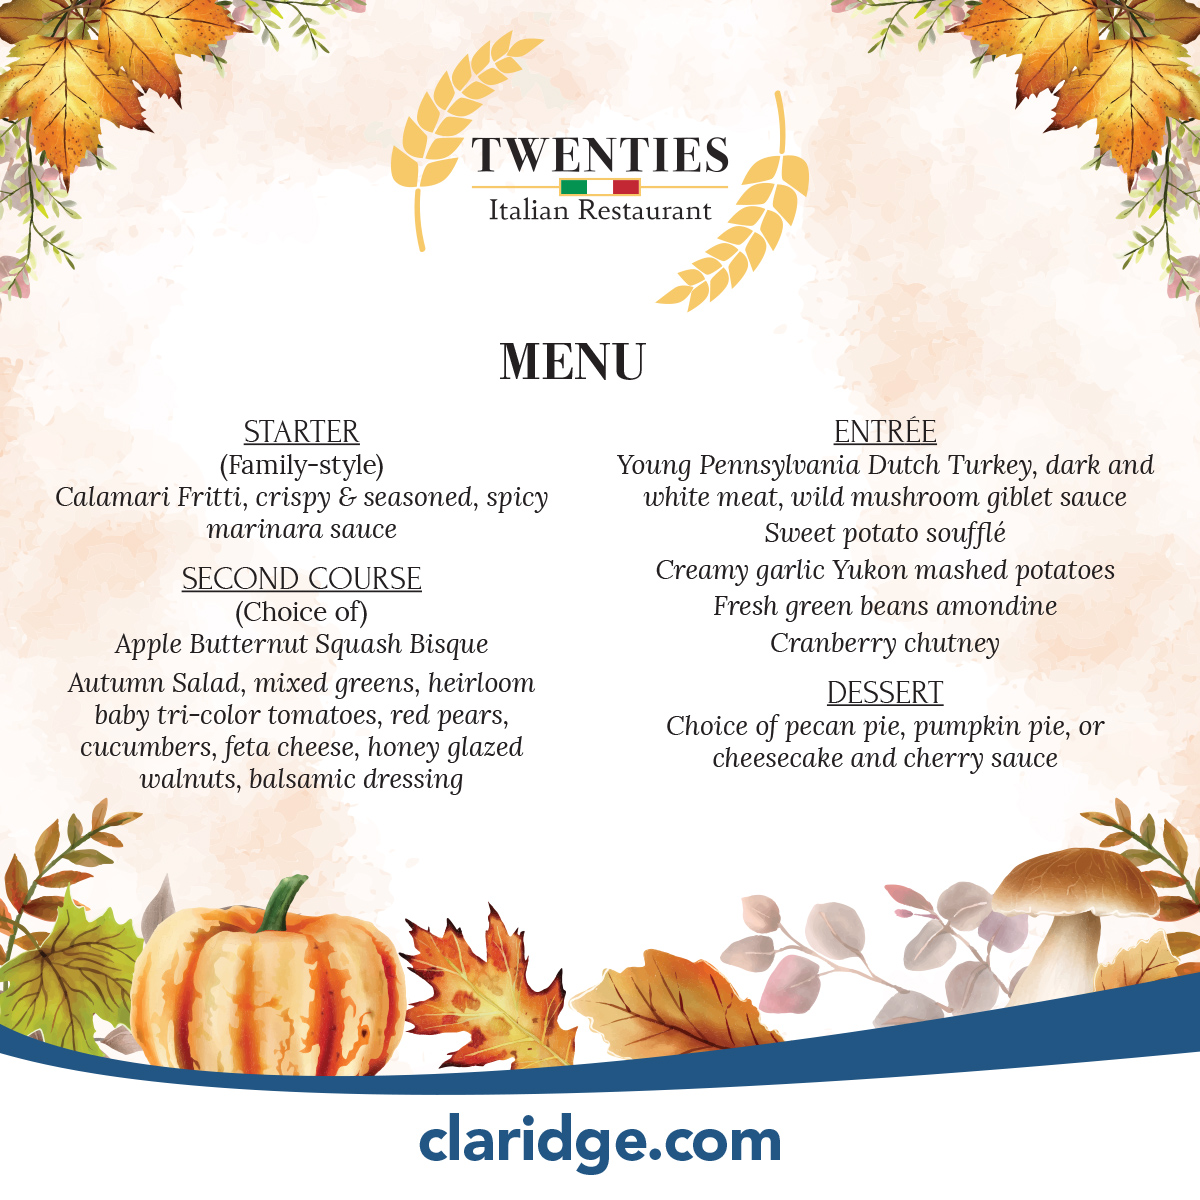 Don't forget to spend your Thanksgiving with us at Twenties Italian Restaurant from 4pm - 9pm! Make your reservation today on OpenTable or by calling 609-487-4373 claridge.com 🦃